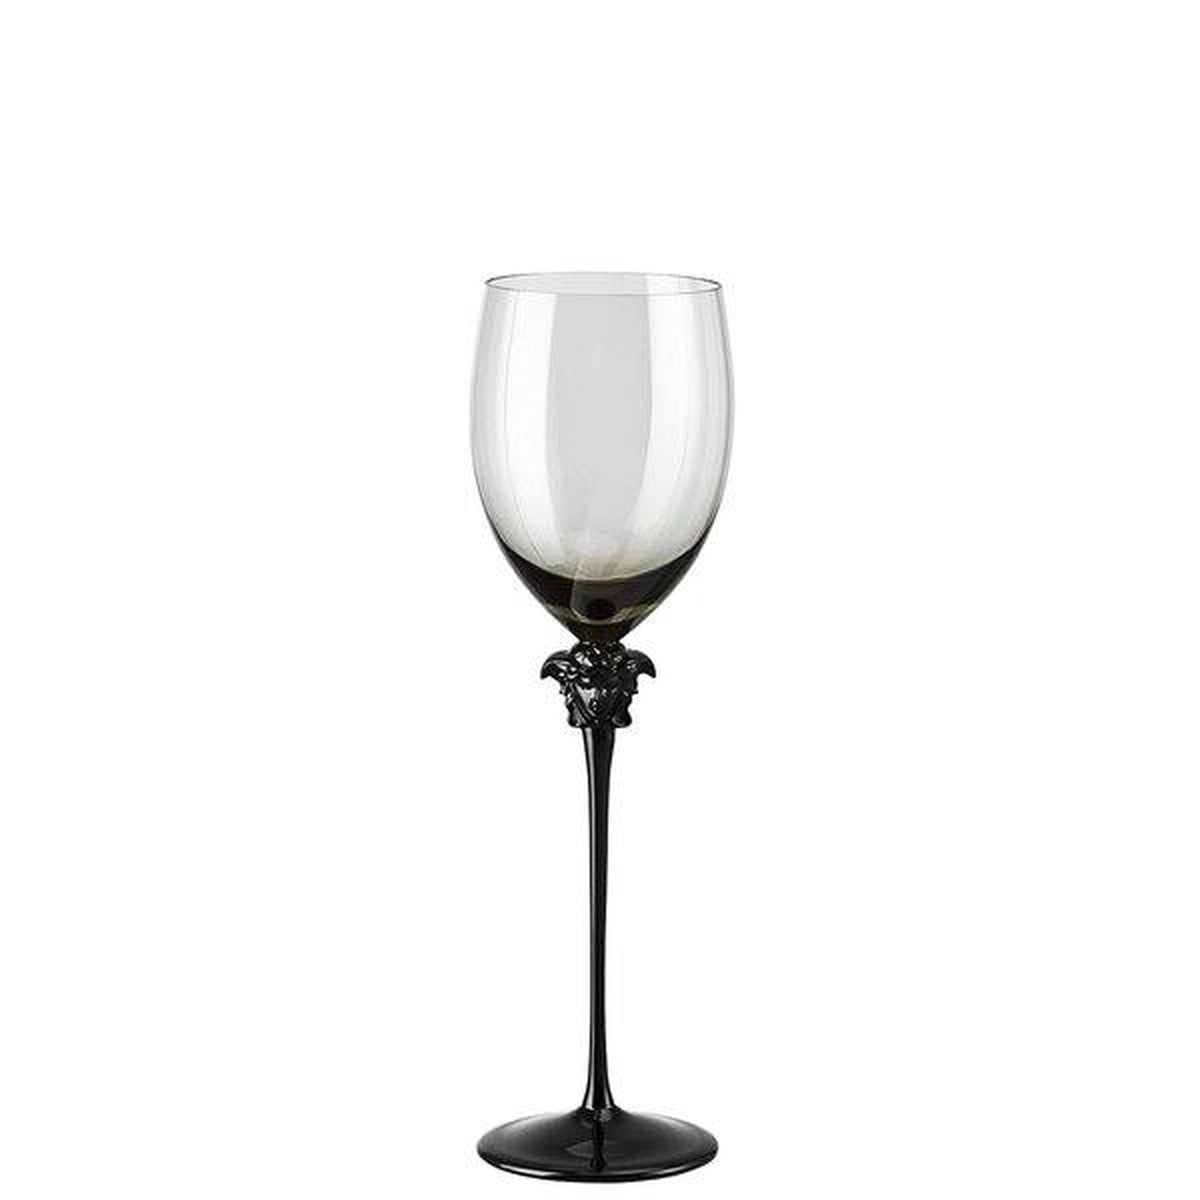 ART & ARTIFACT Rose Wine Glass - Floral Shaped Stemware, Holds 4 Ounce -  Clear